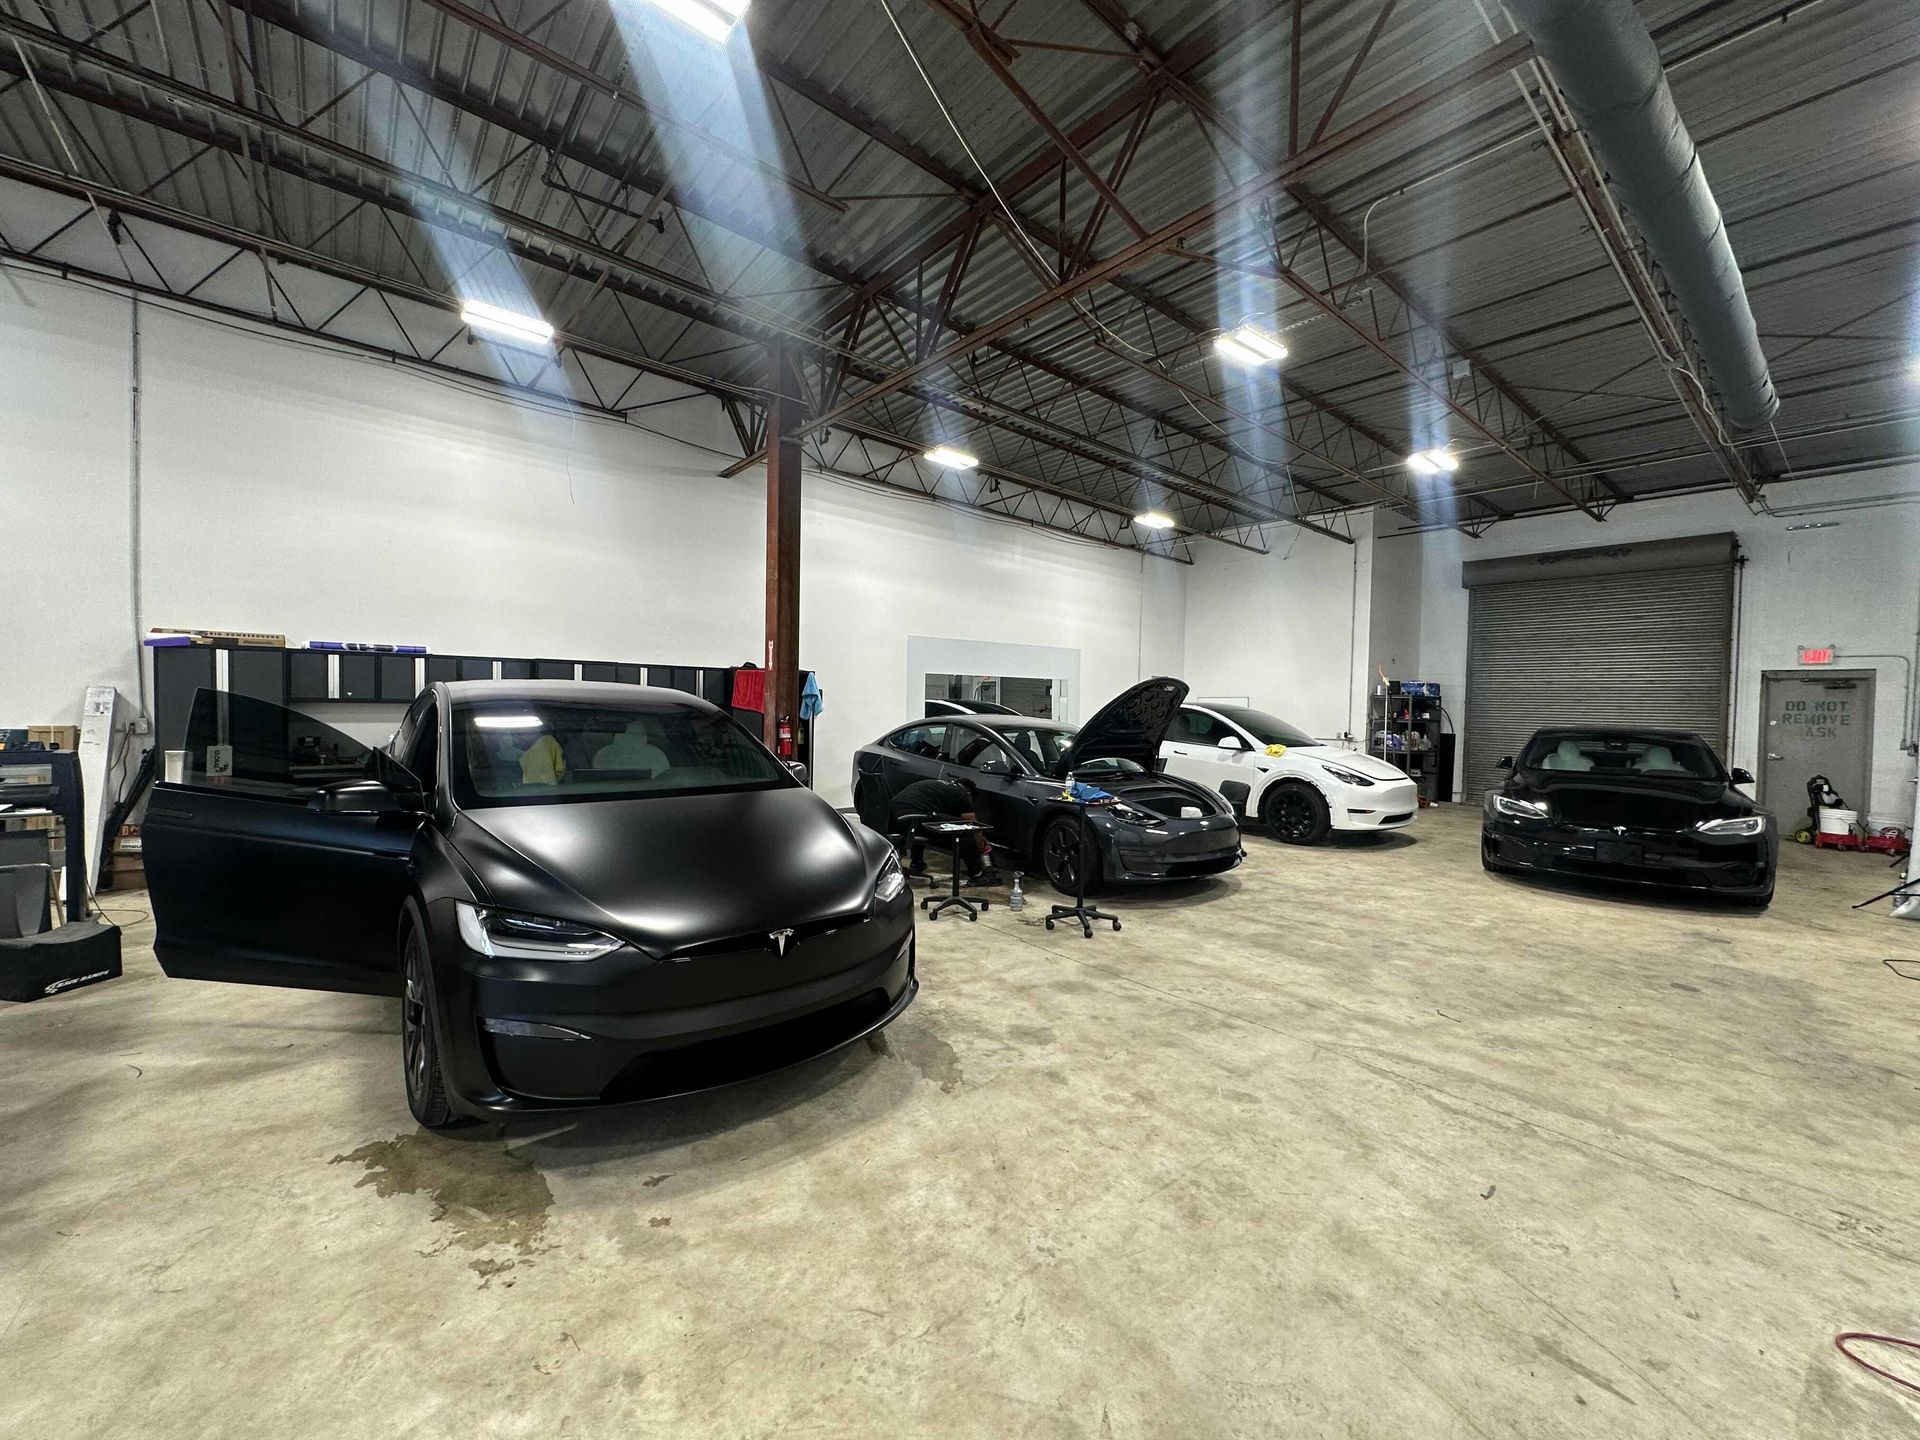 a tesla model s is parked in a garage with other cars .
